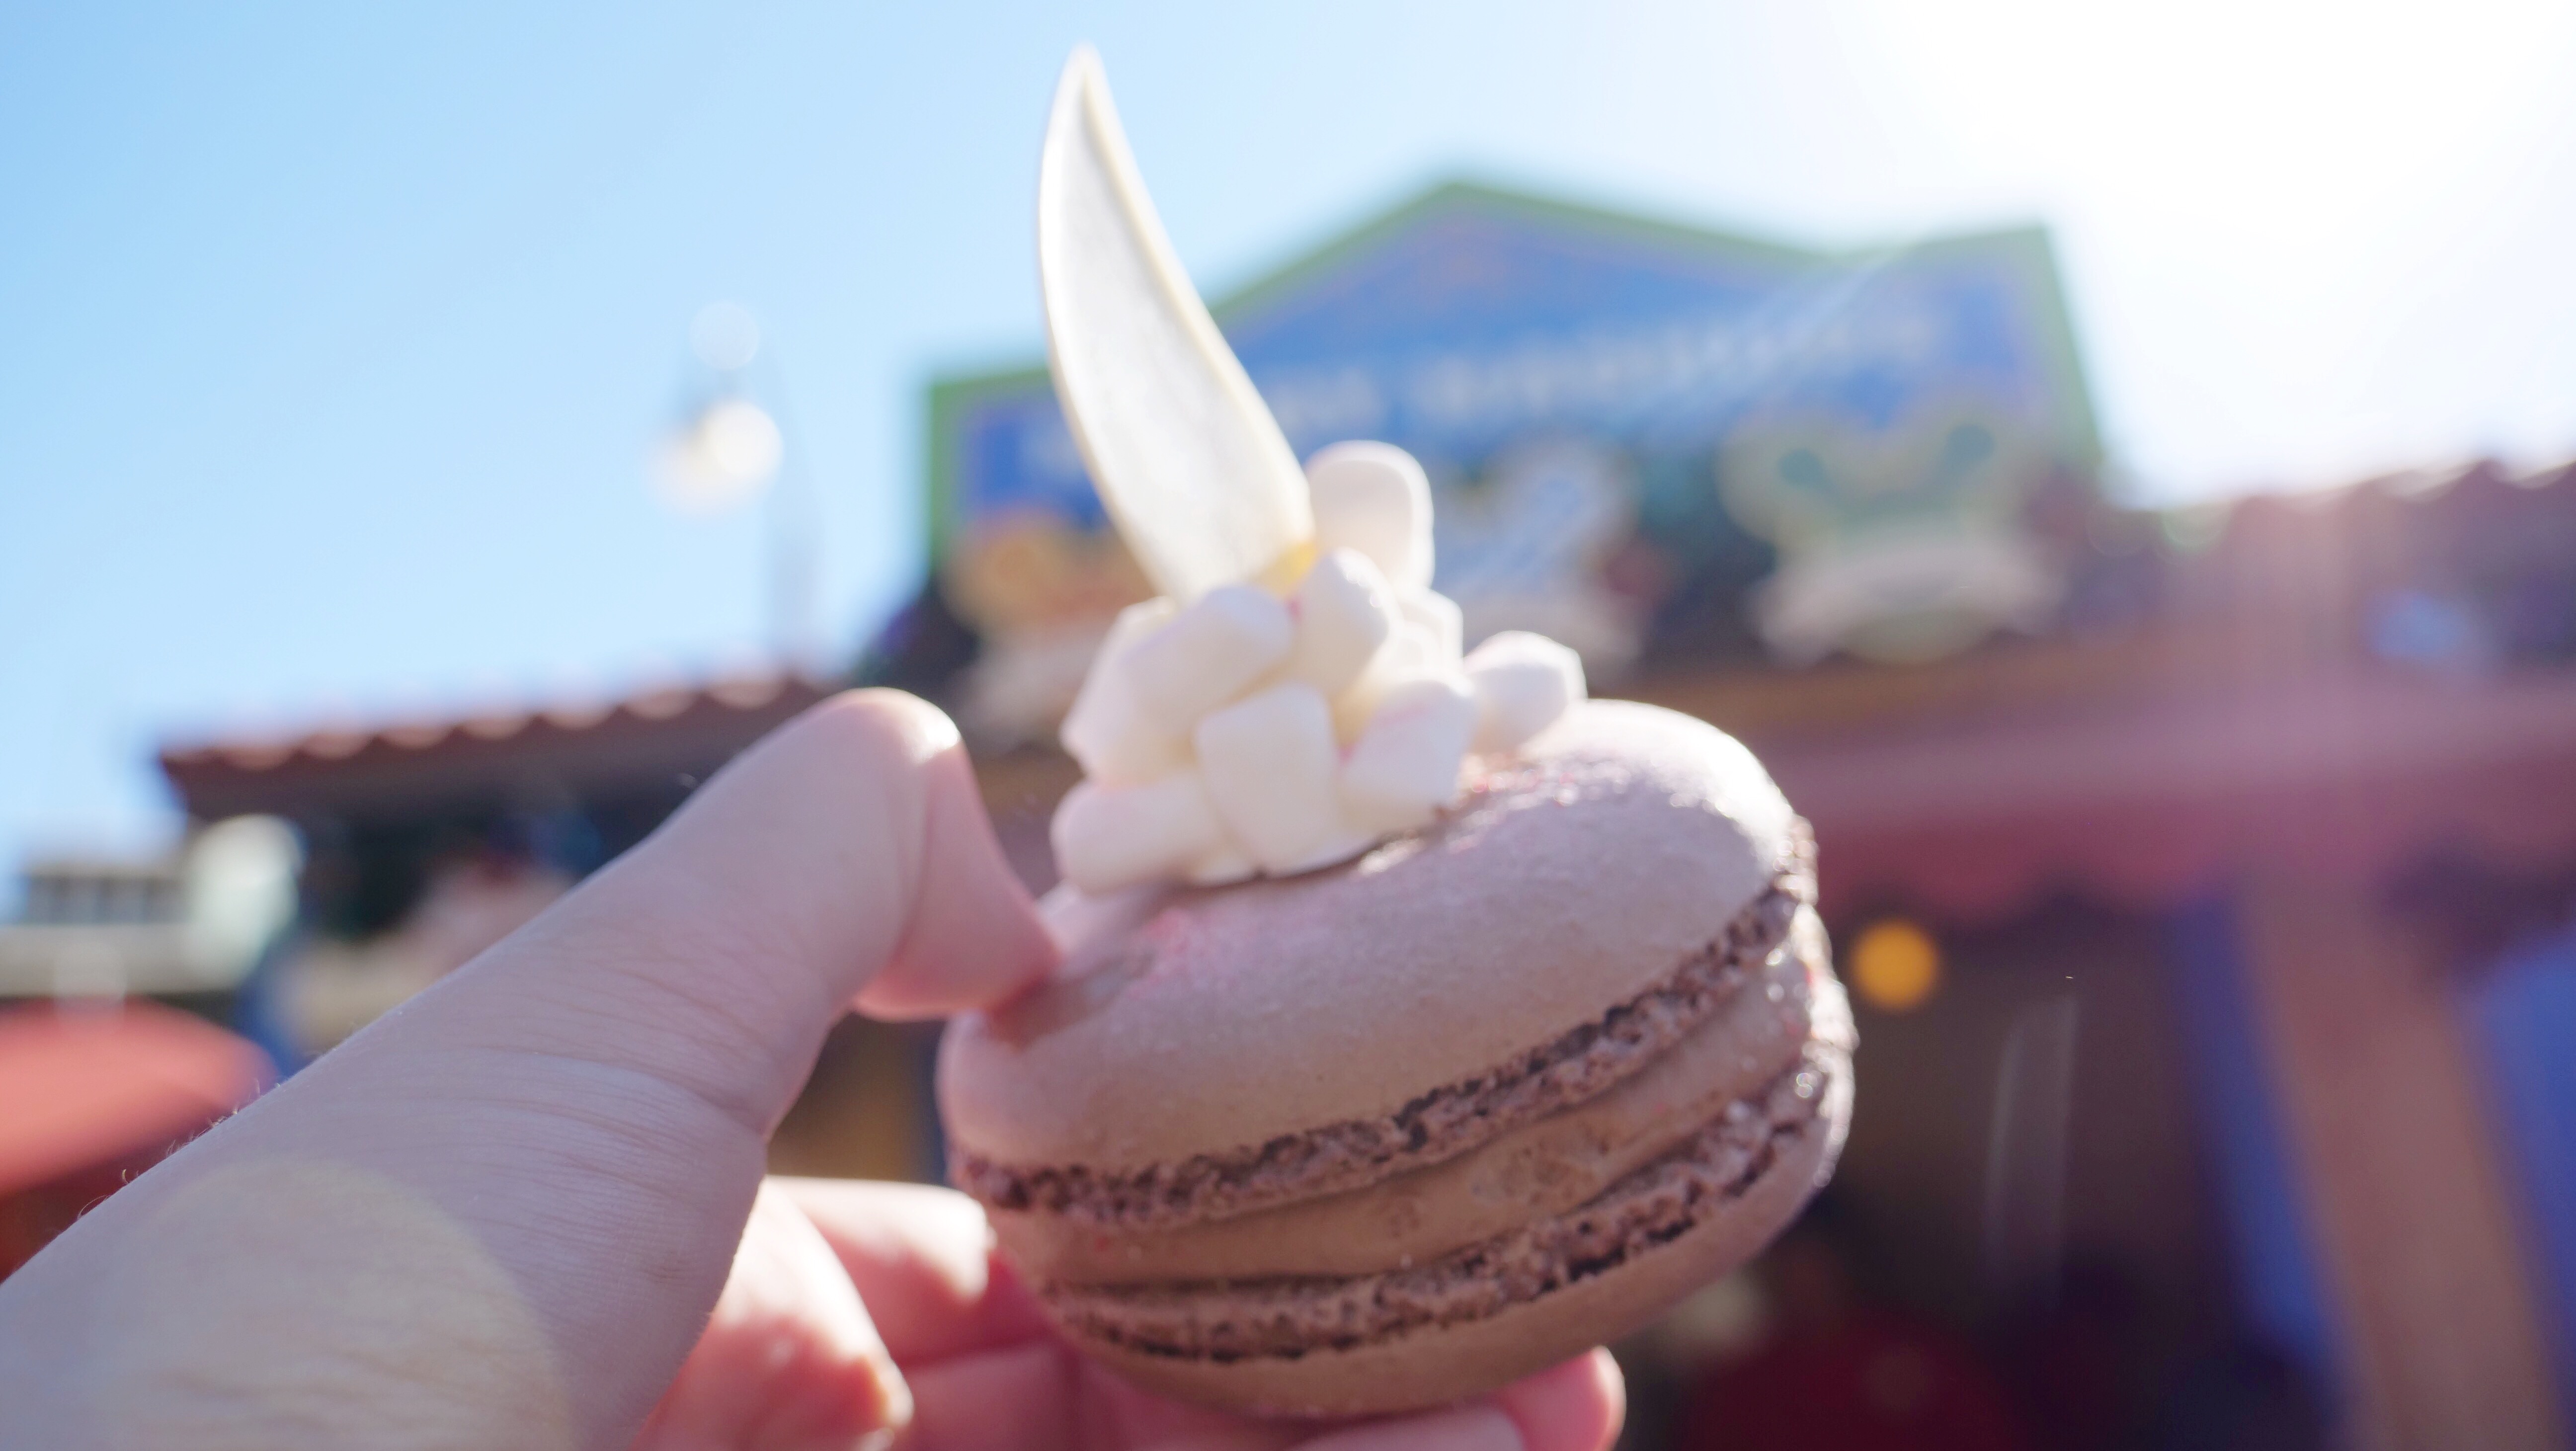 Disneyland Holiday Food and Merchandise Guide 2018